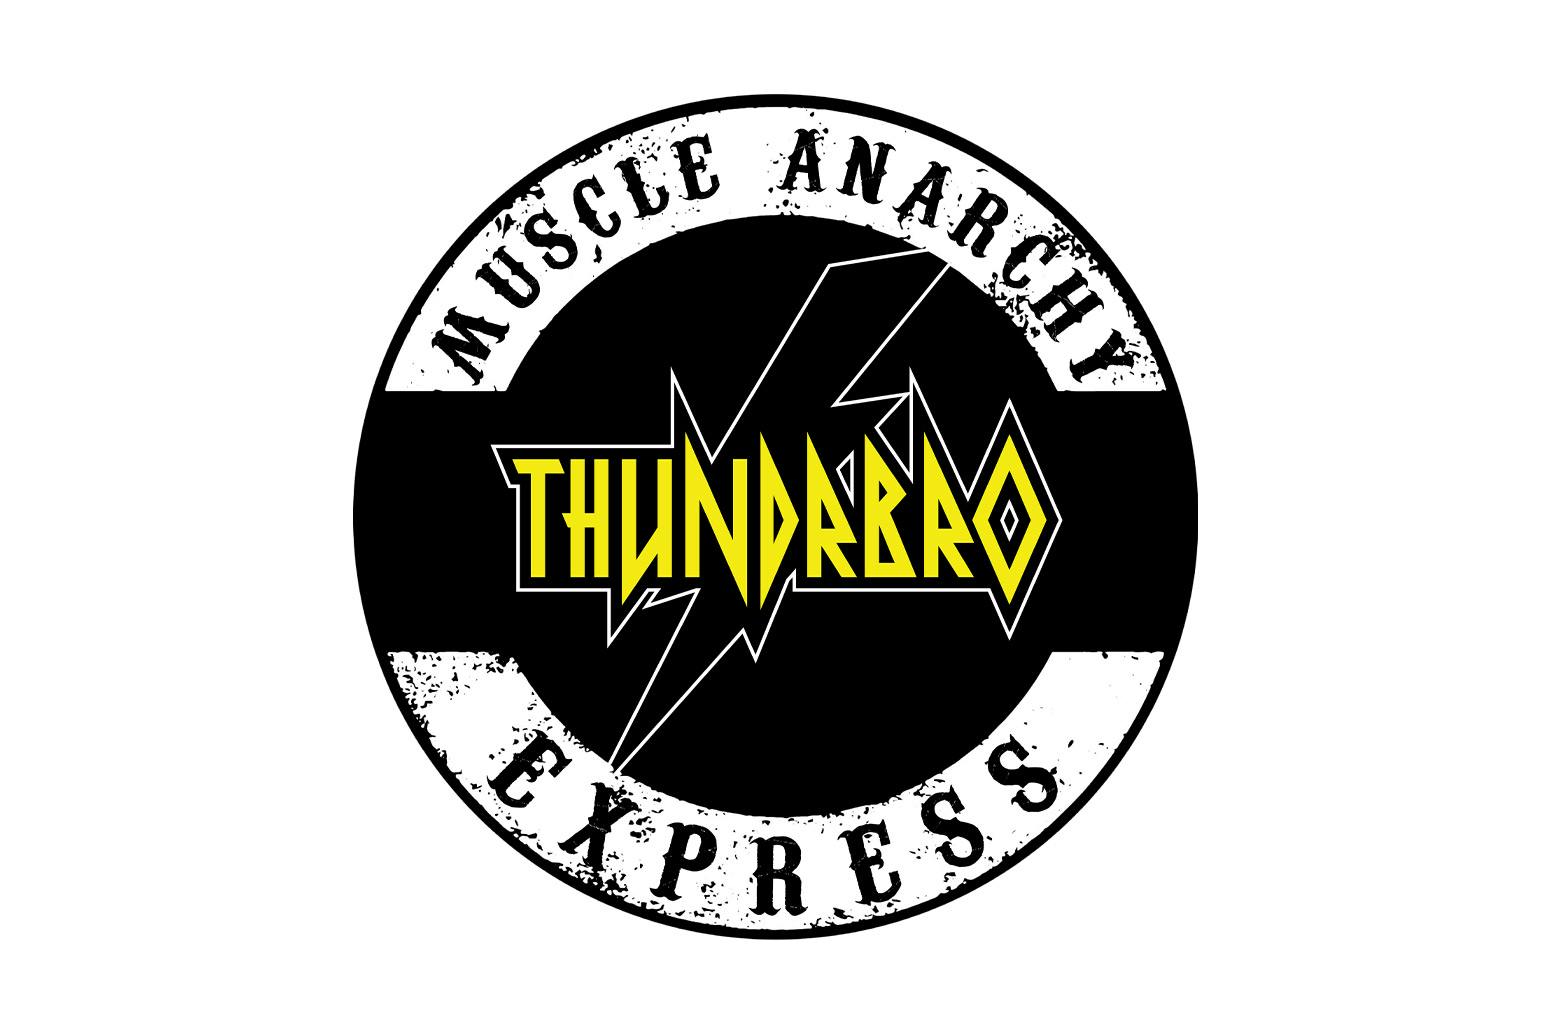 Muscle Anarchy Express